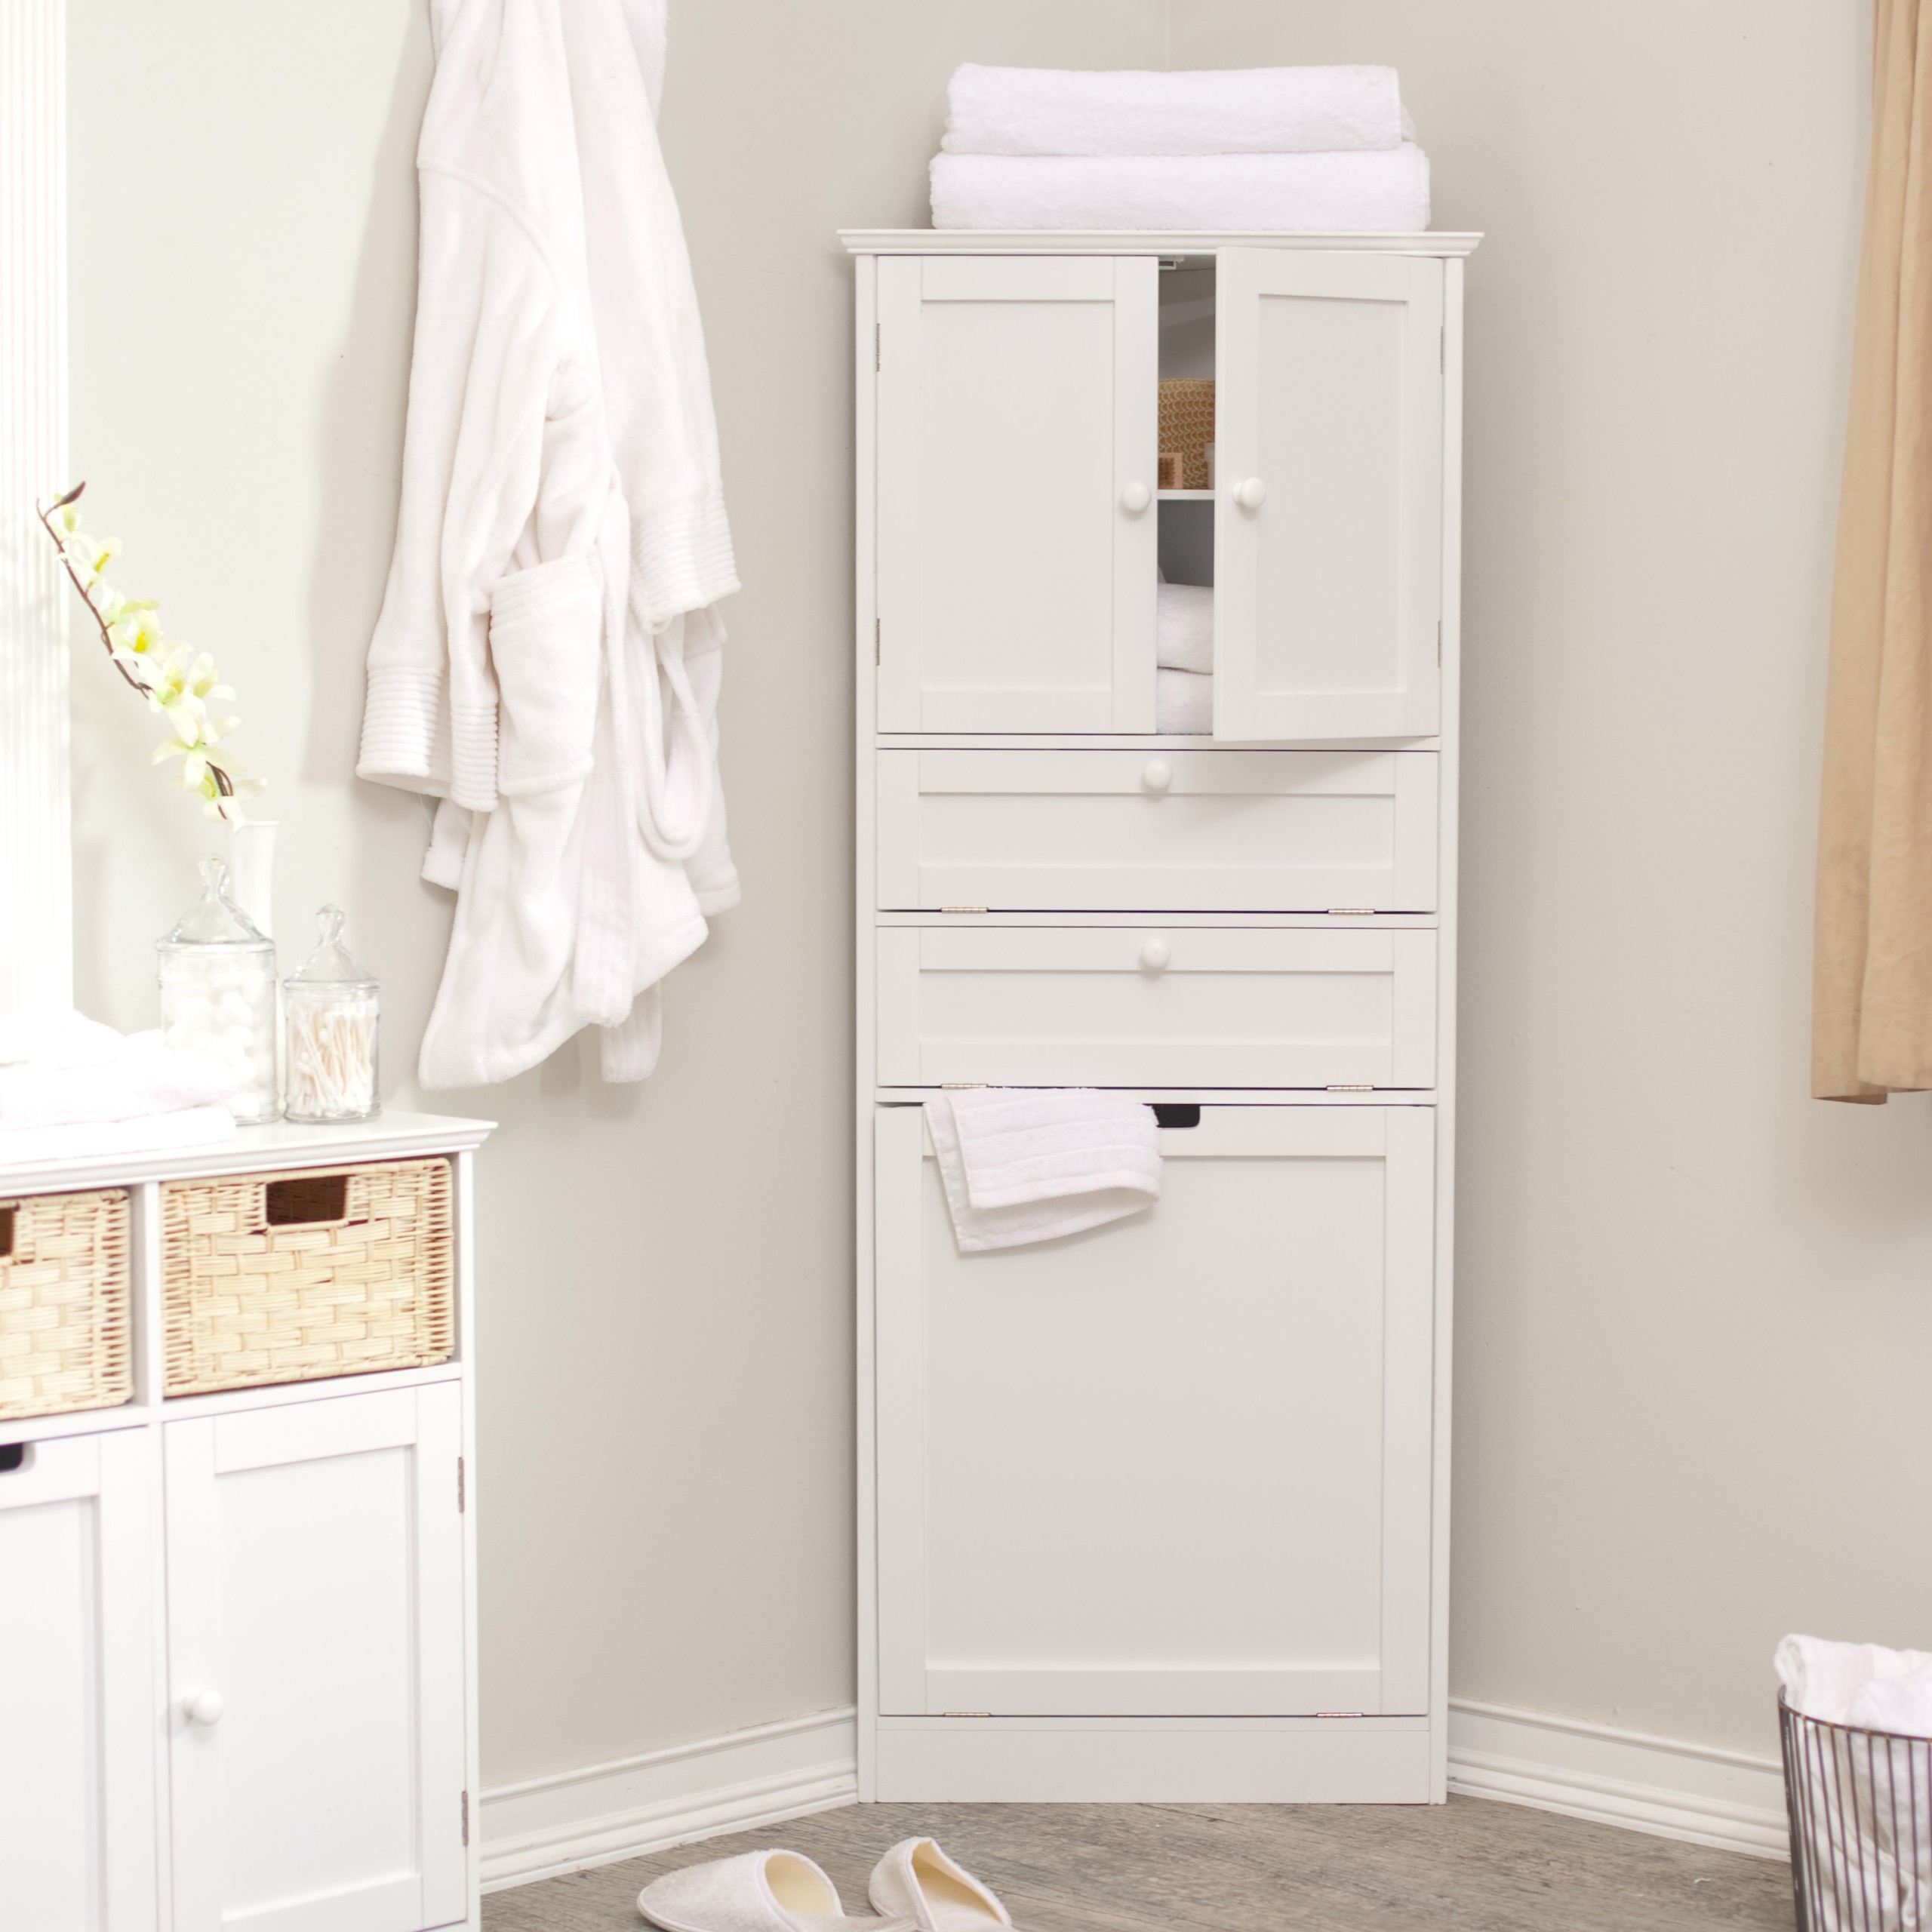 Taylor corner linen tower with hamper white at hayneedle